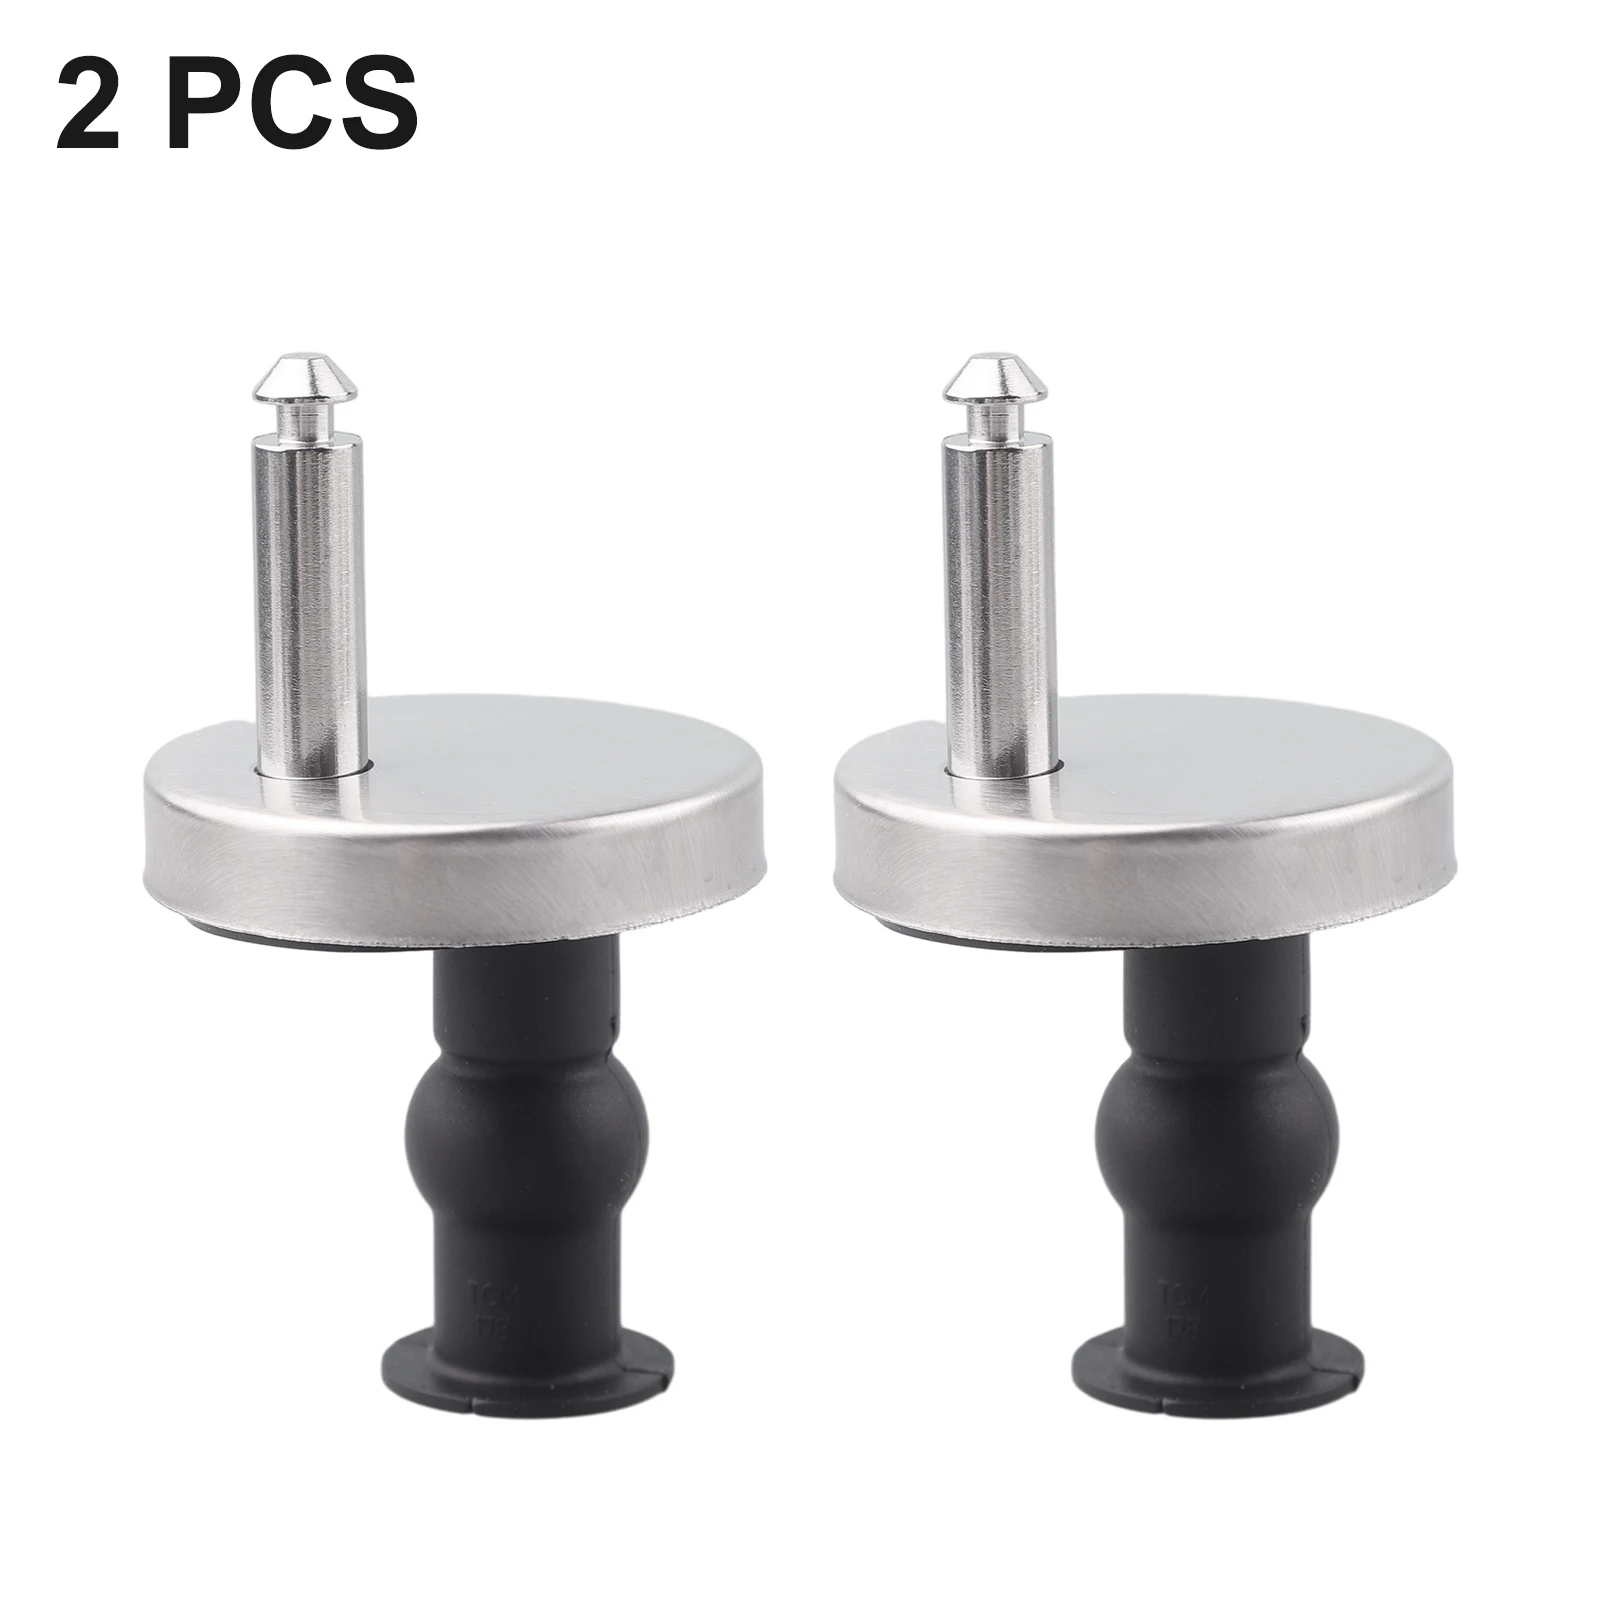 

2pcs Toilet Seat Hinges Top Close Soft Release Quick Fitting Stainless Steel Heavy Duty Hinge Replacement Furniture Hardware